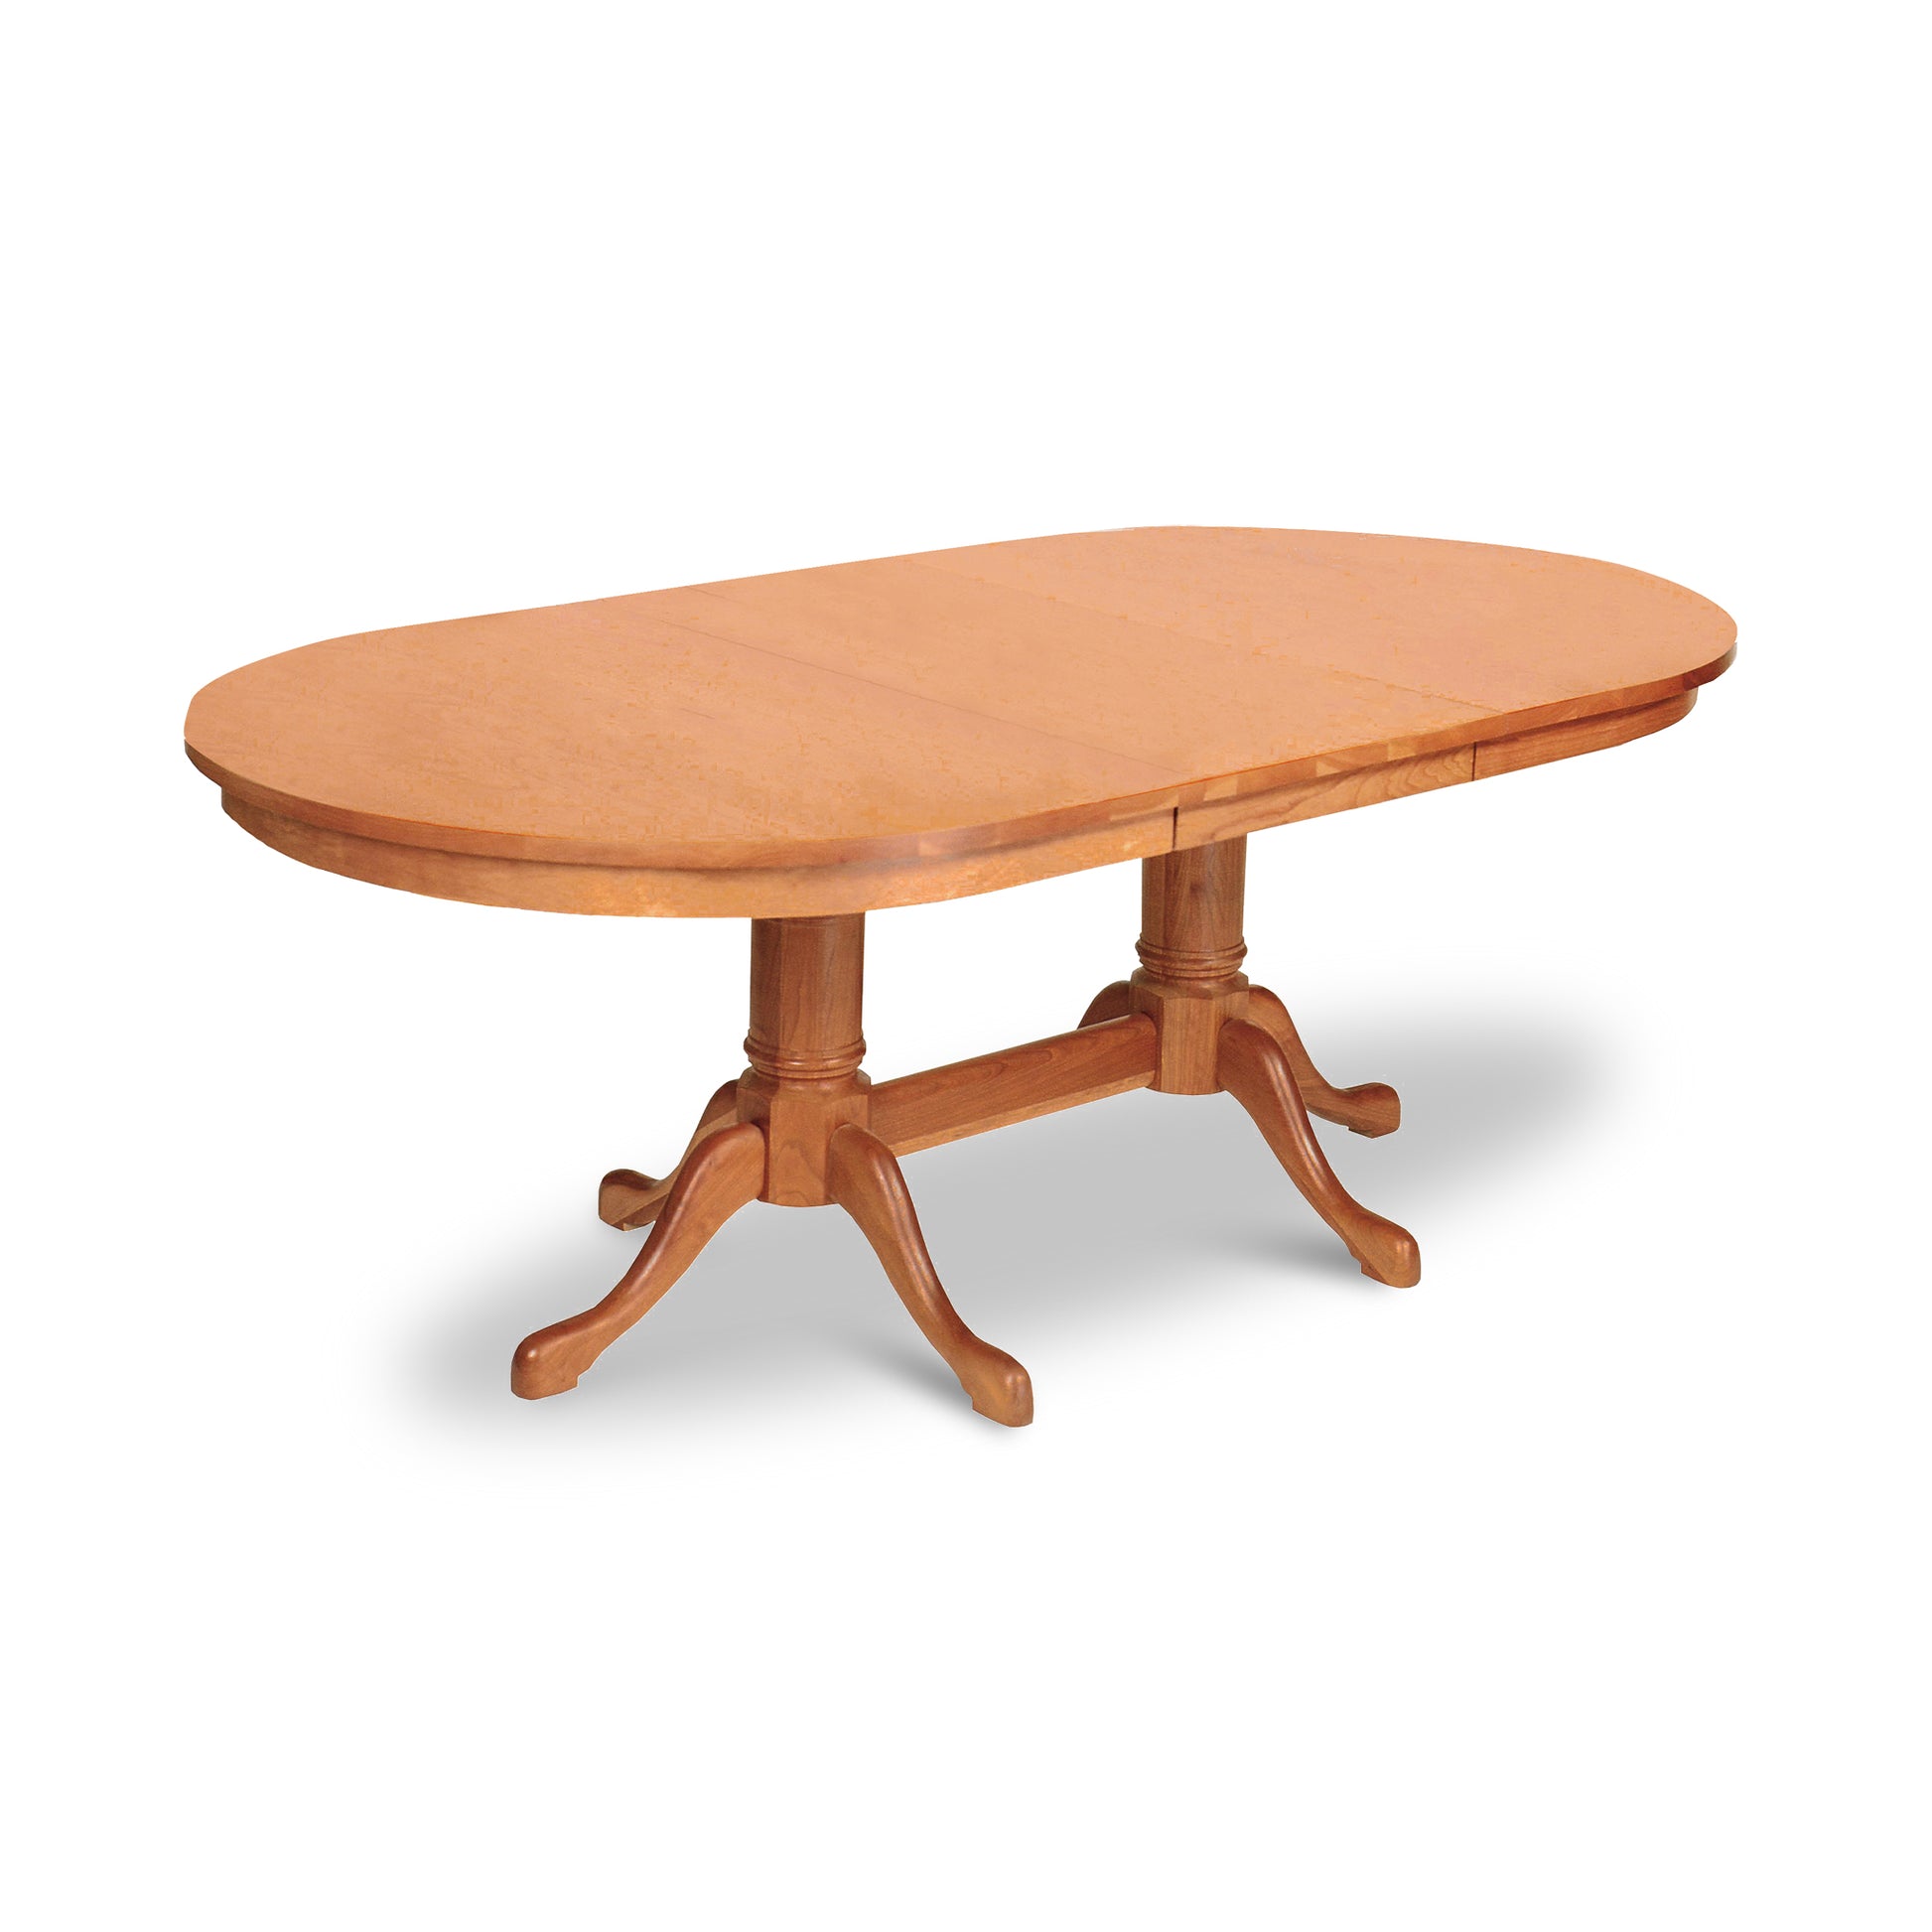 A Cabriole Double Pedestal Extension Dining Table from Lyndon Furniture, with solid wood construction and four legs.